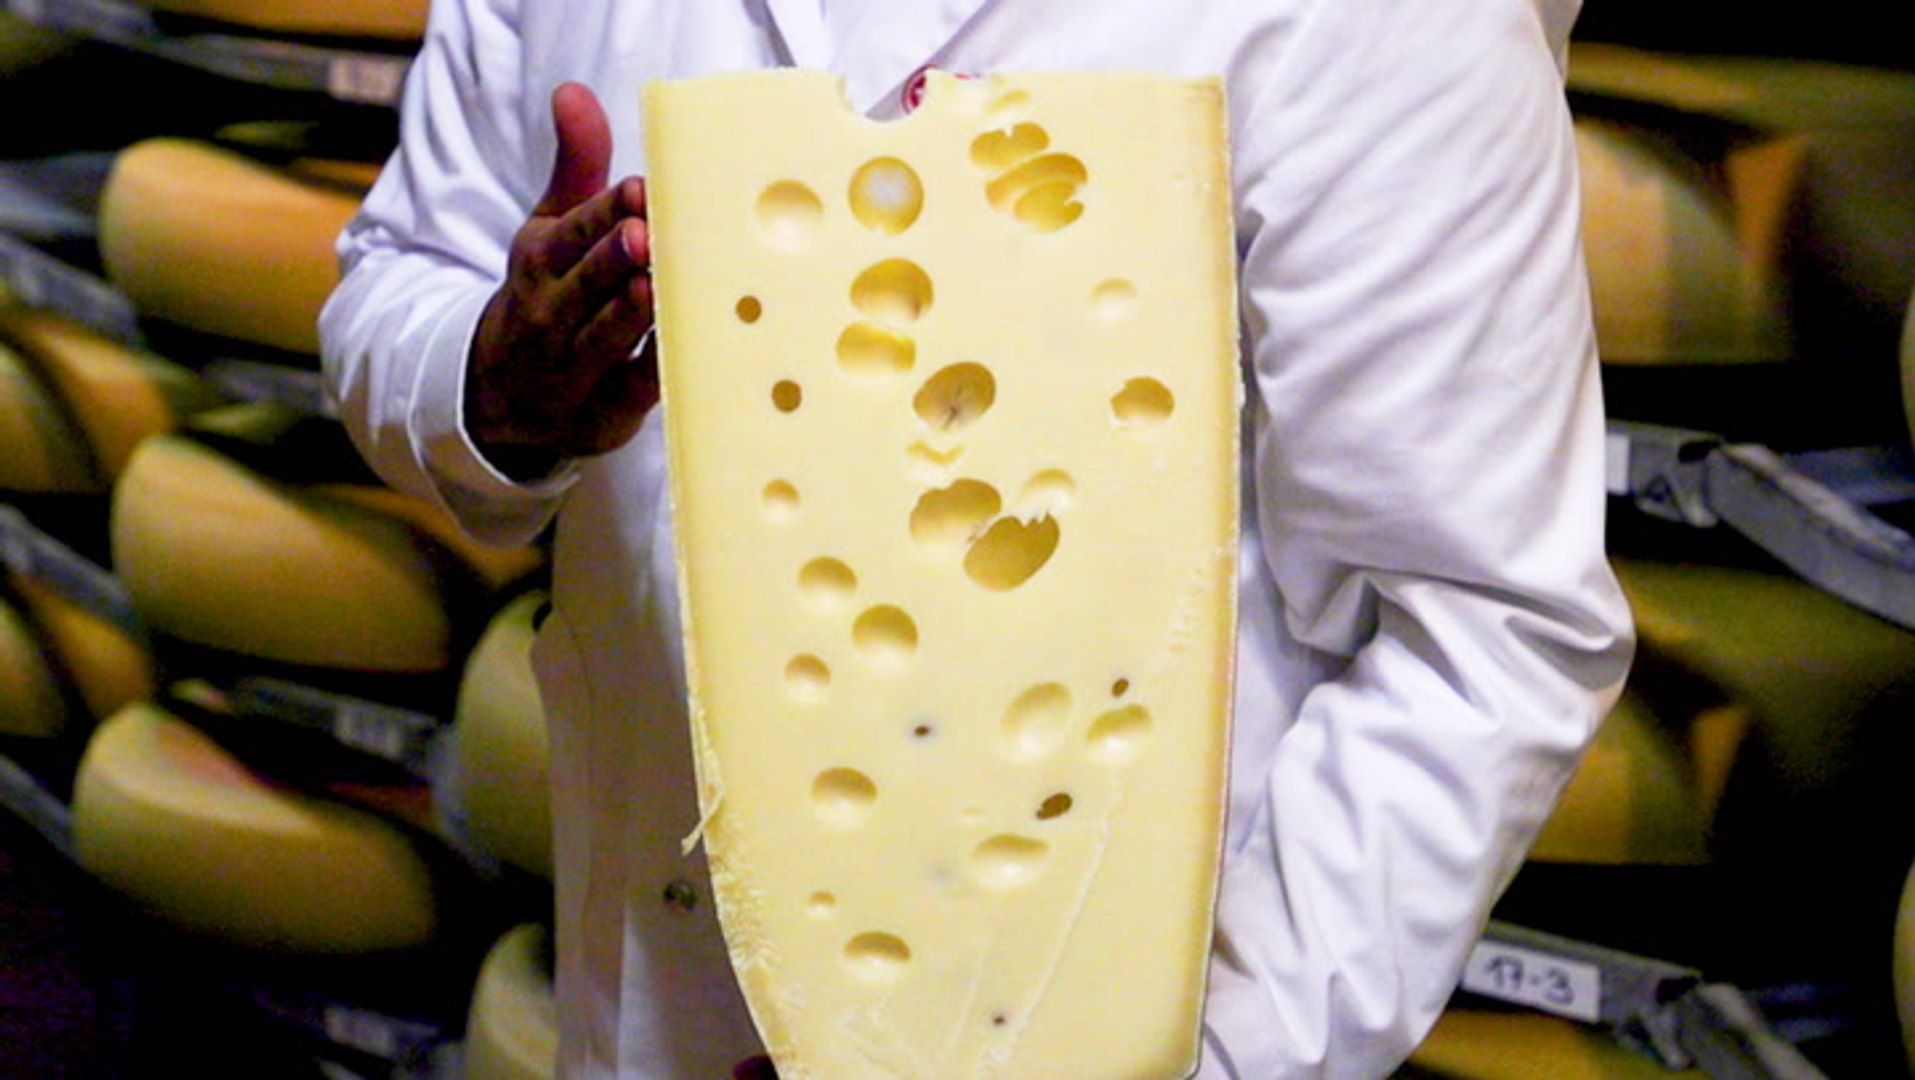 How Swiss Emmentaler cheese is made